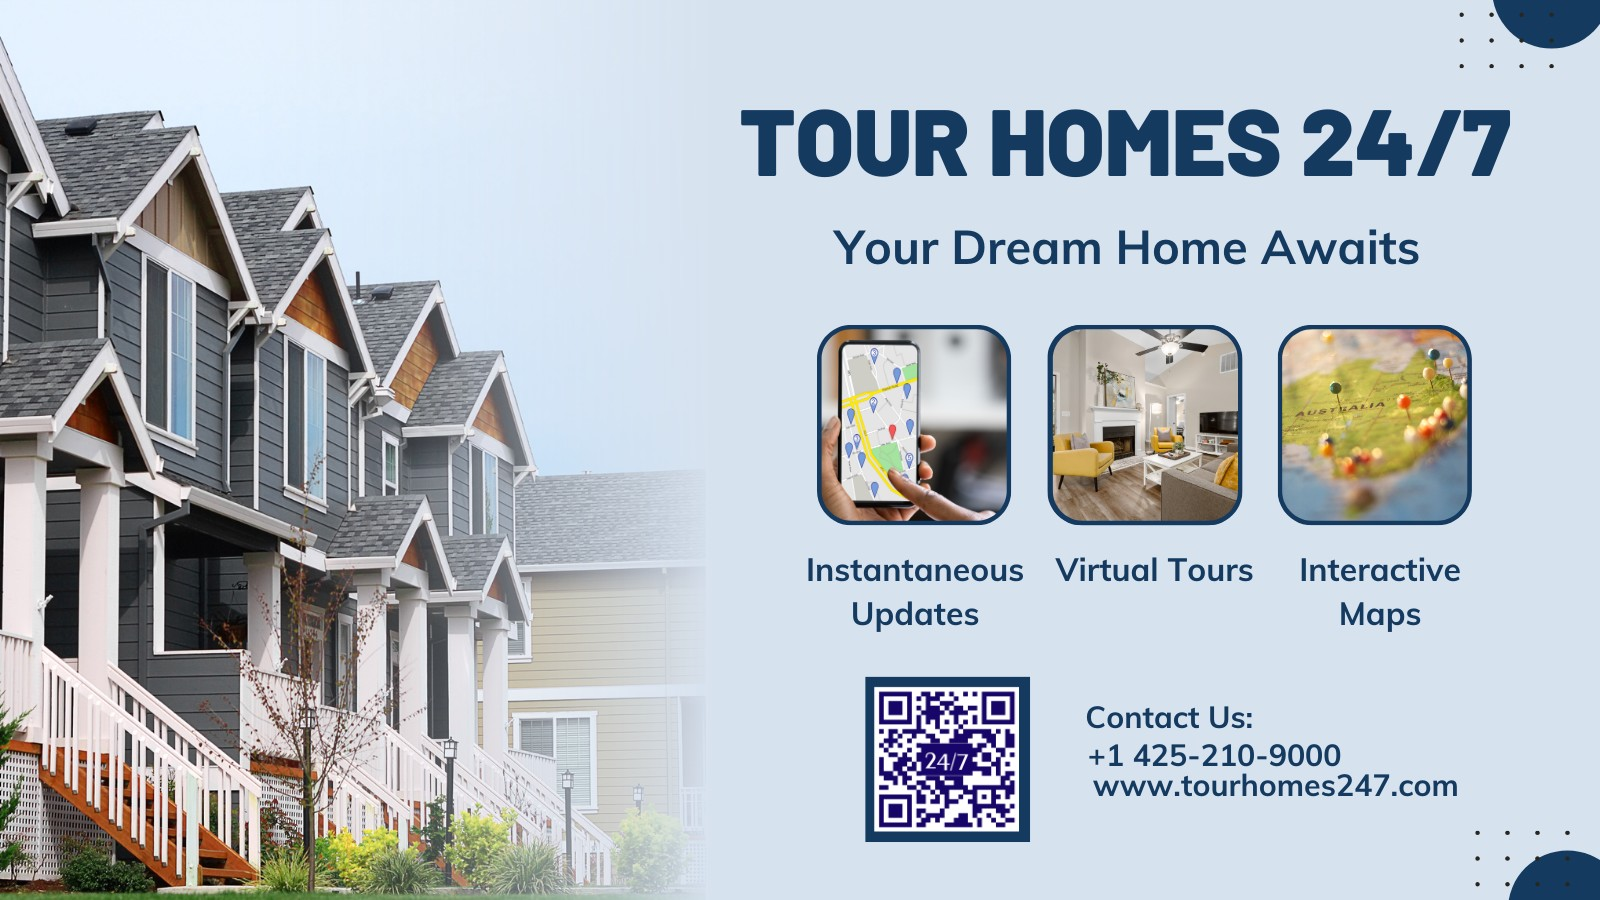 Looking for your dream home? Discover your perfect match with Tour Homes 24/7